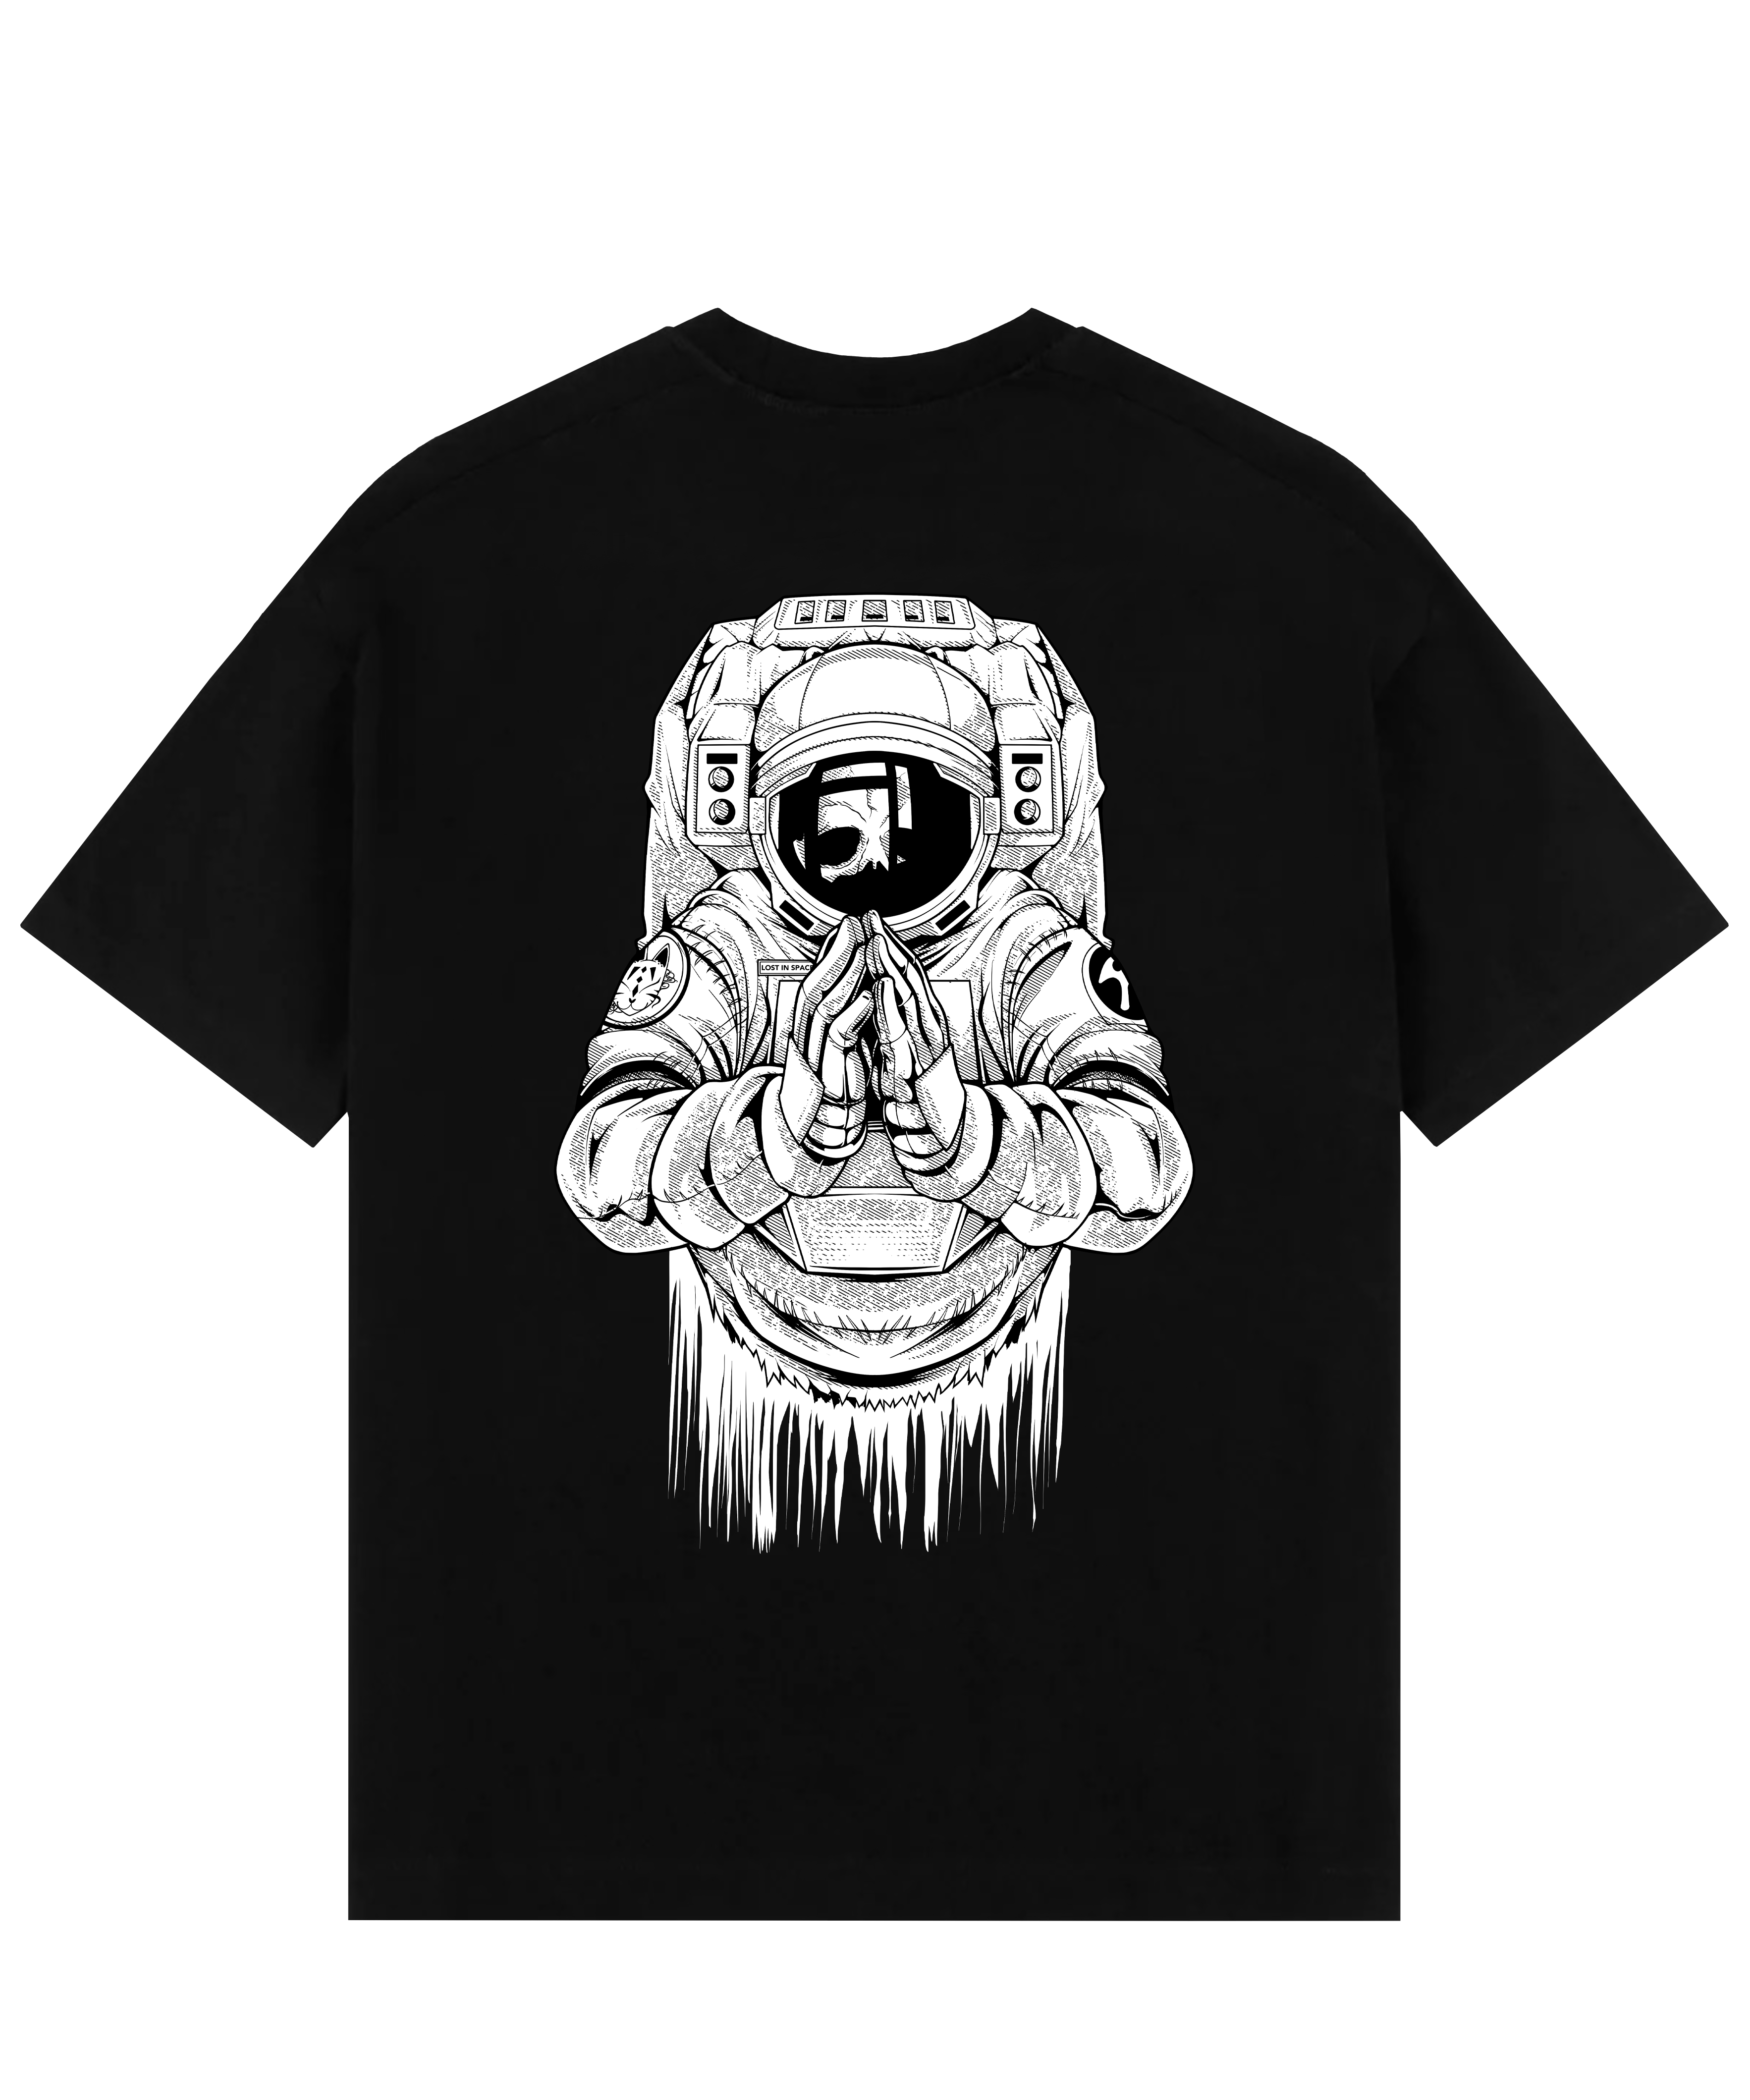 "Astronaut X Lost In Space - Chainsaw Man" Oversize T-Shirt